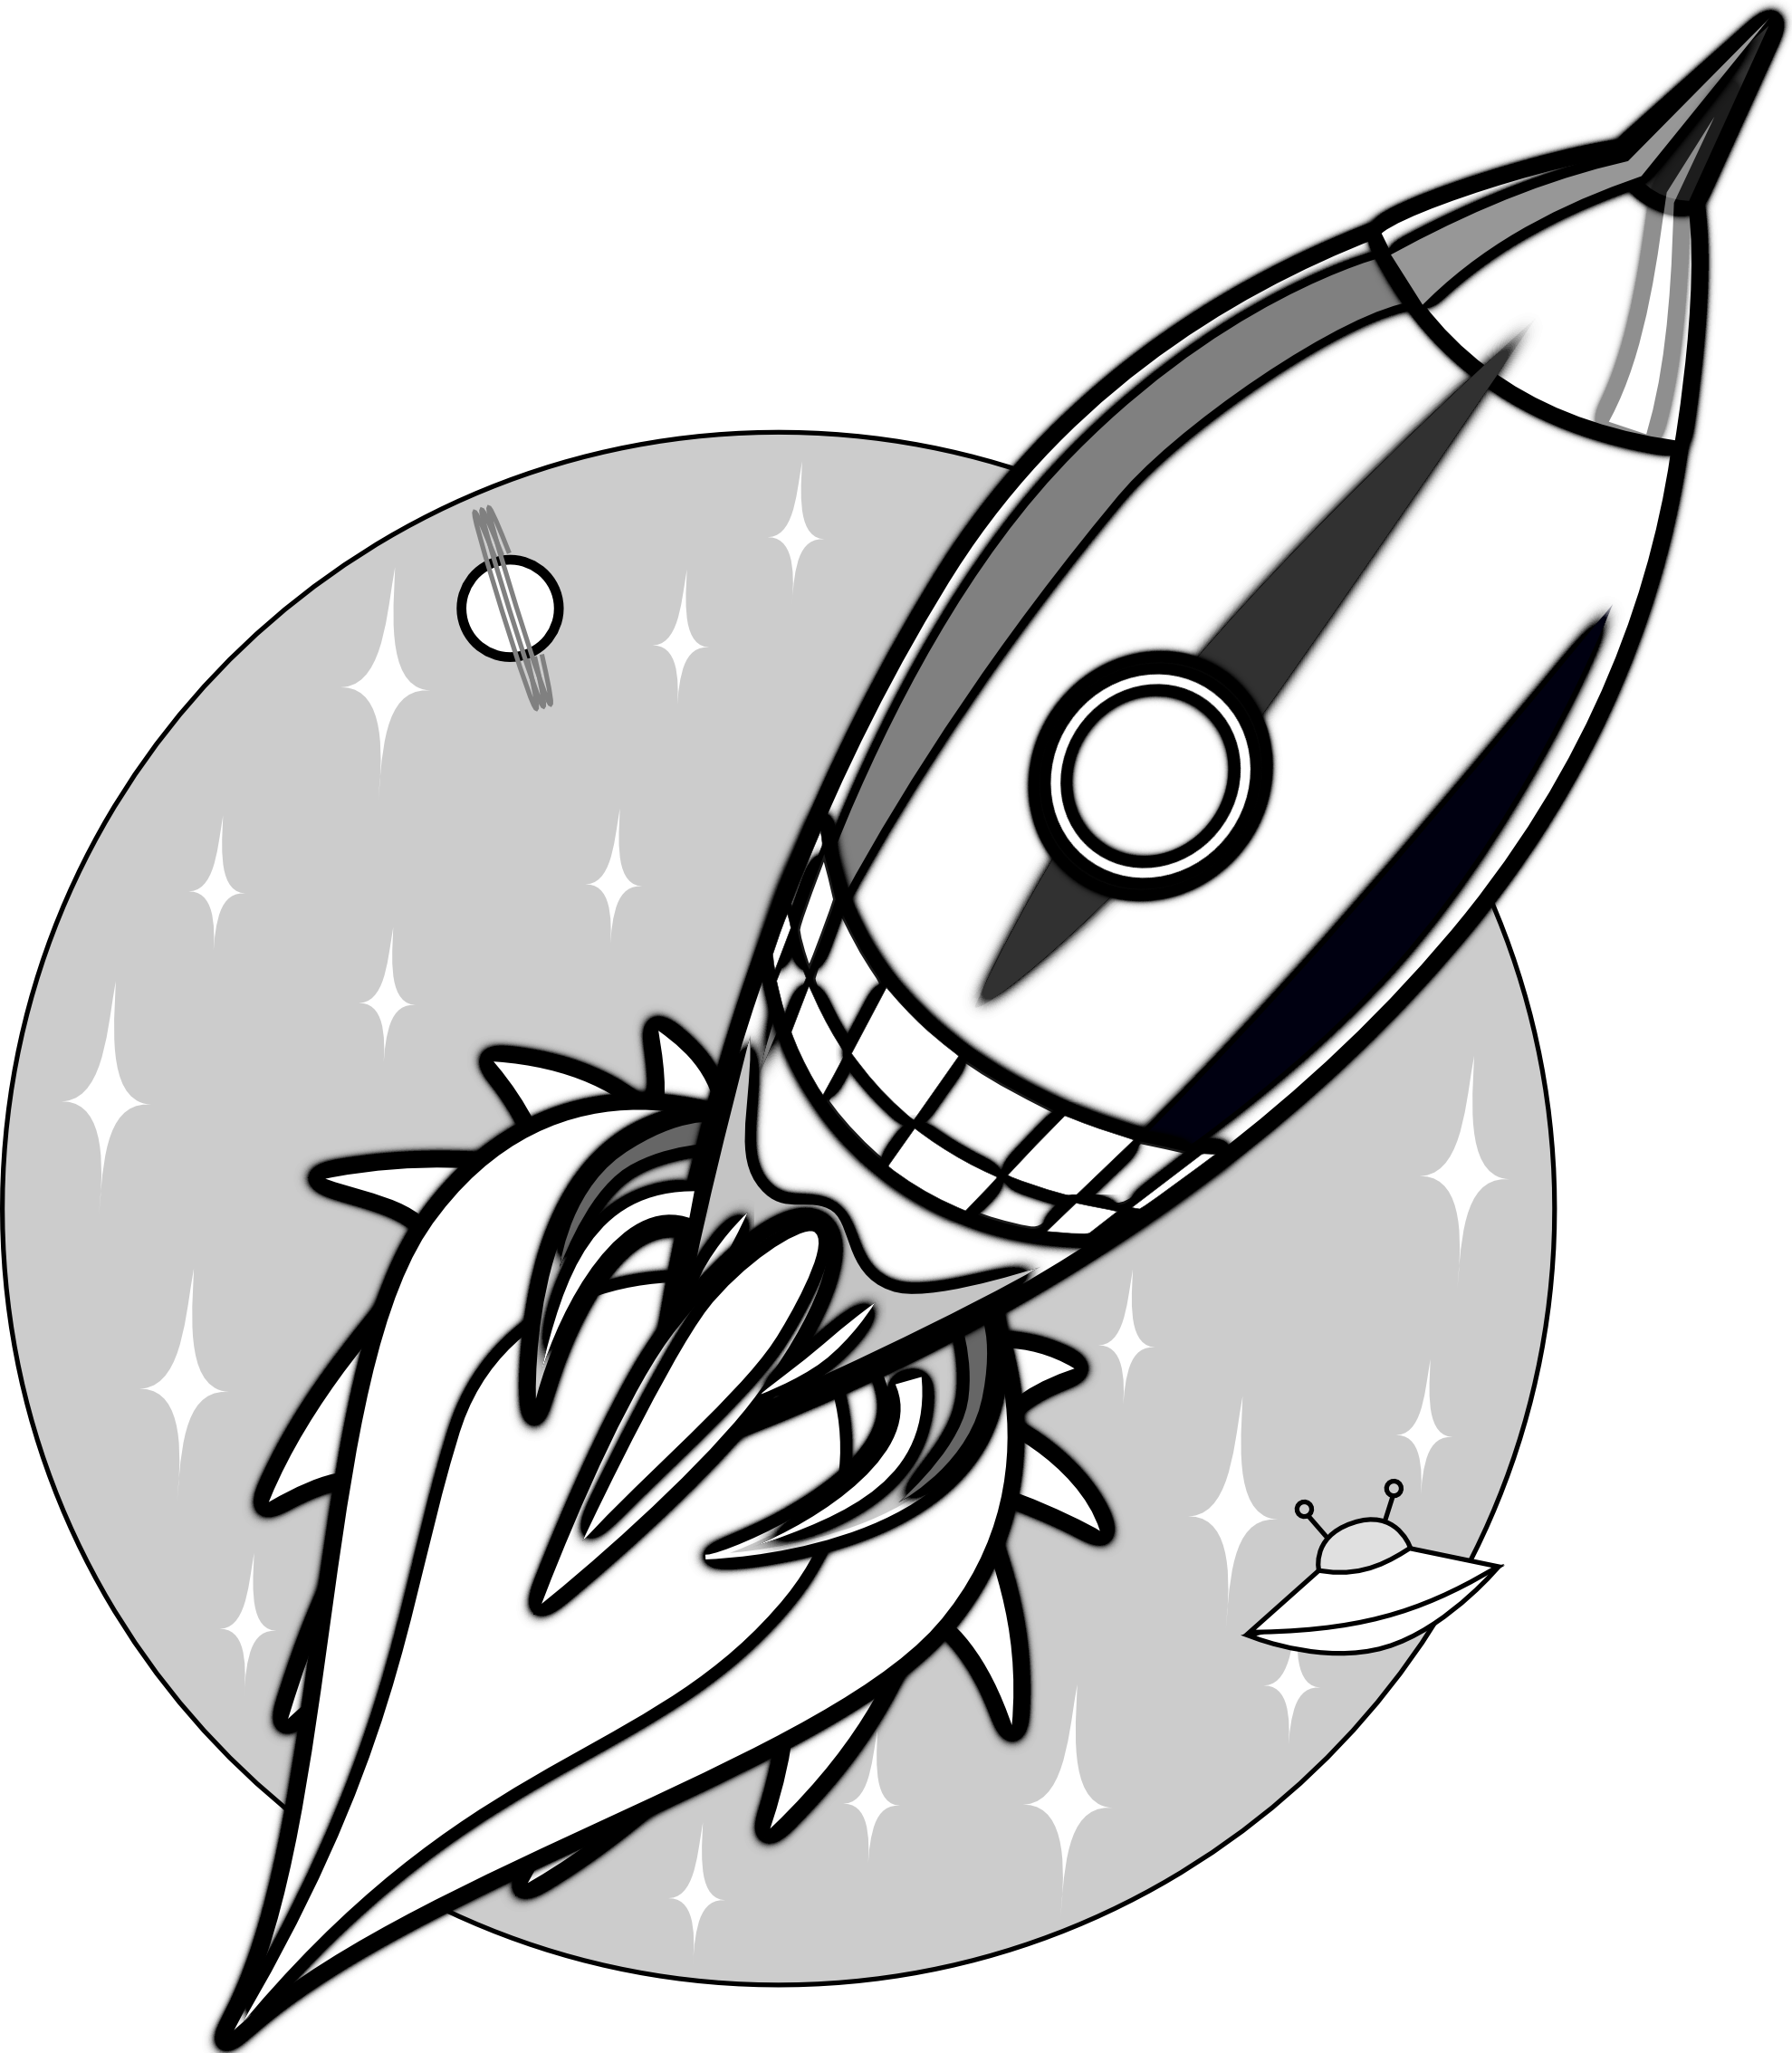 Free Picture Of A Rocket, Download Free Picture Of A Rocket png images